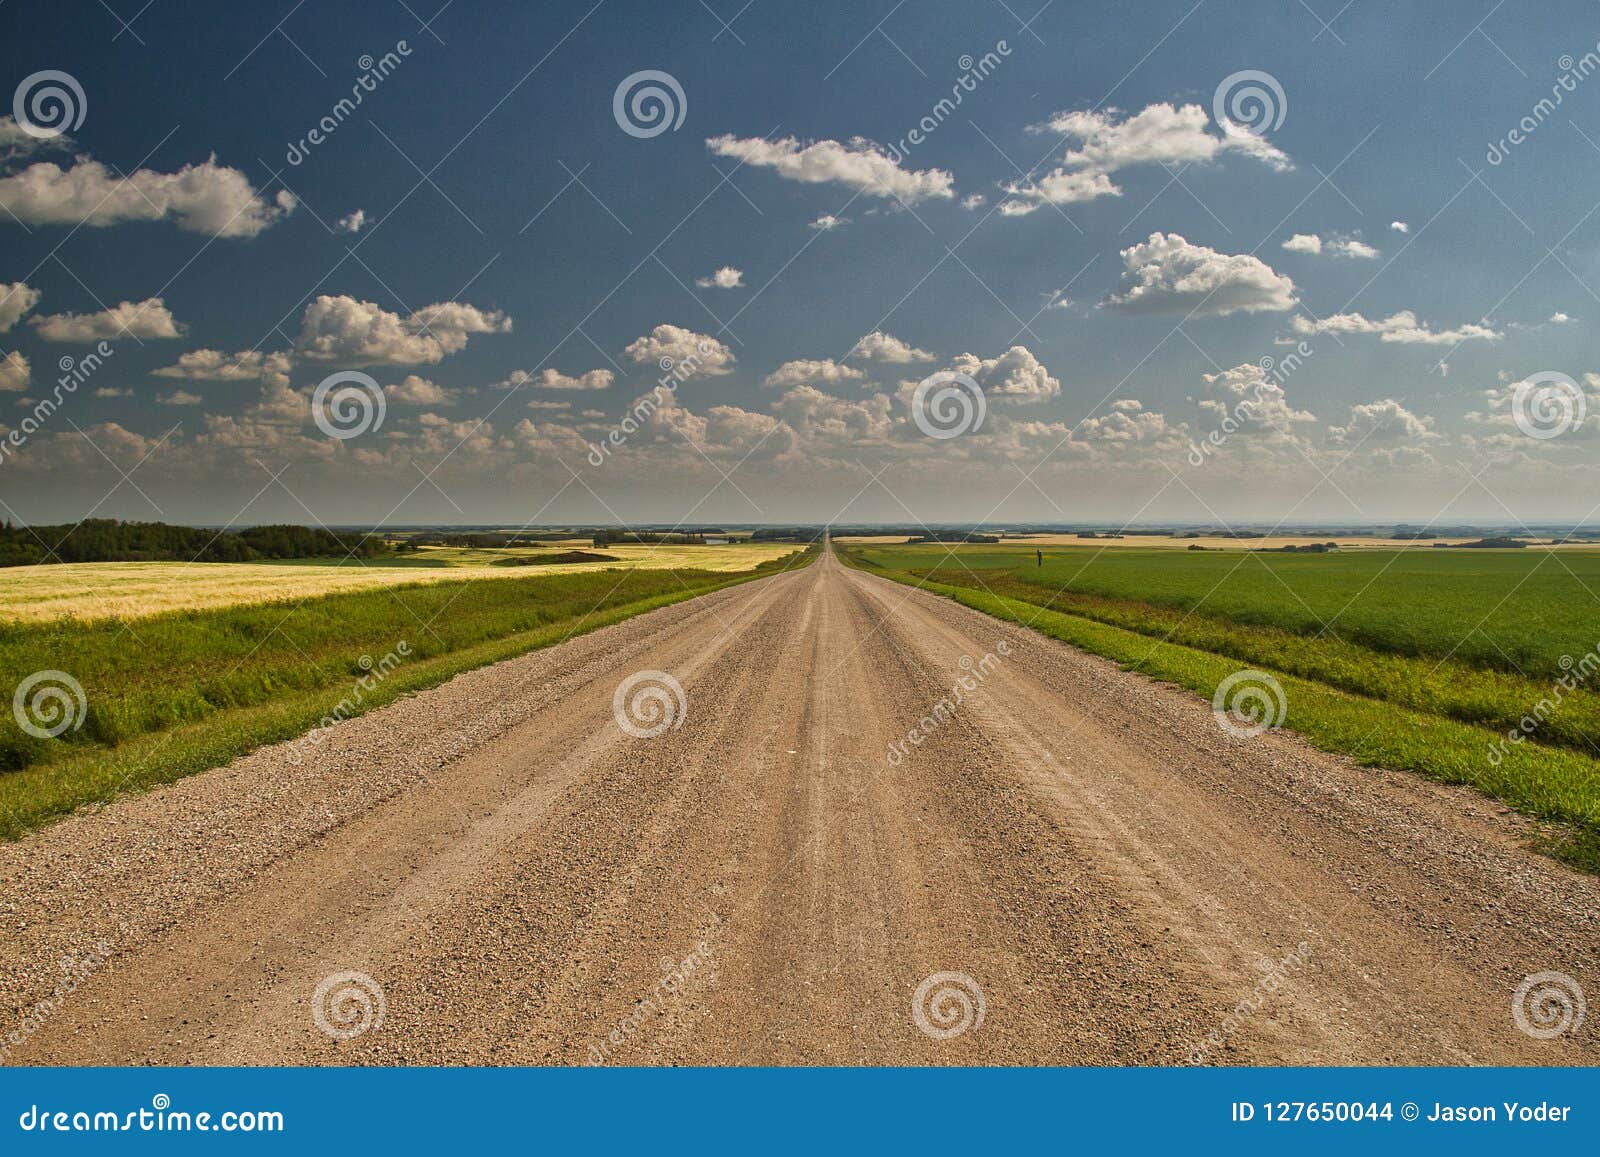 a straight dirt road into the plains